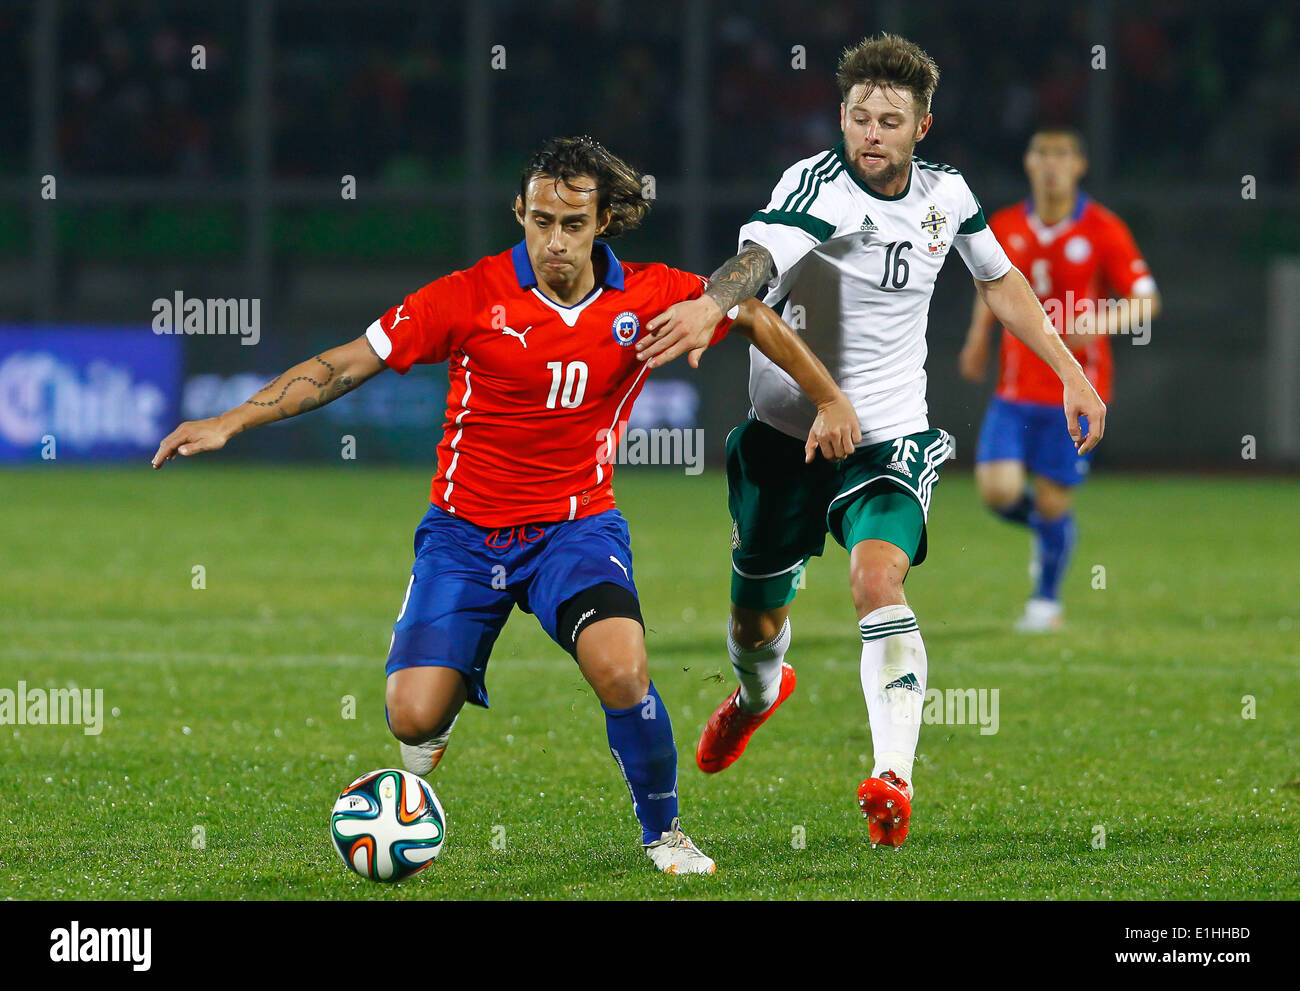 Valparaiso, Chile. 4th June, 2014. Chile's Jorge Valdivia (L) vies for the ball with Oliver Norwood of Northern Ireland during a friendly match prior to the 2014 FIFA World Cup, held at Elias Figueroa Brander Stadium, in Valparaiso, Chile, on June 4, 2014. © Str/Xinhua/Alamy Live News Stock Photo